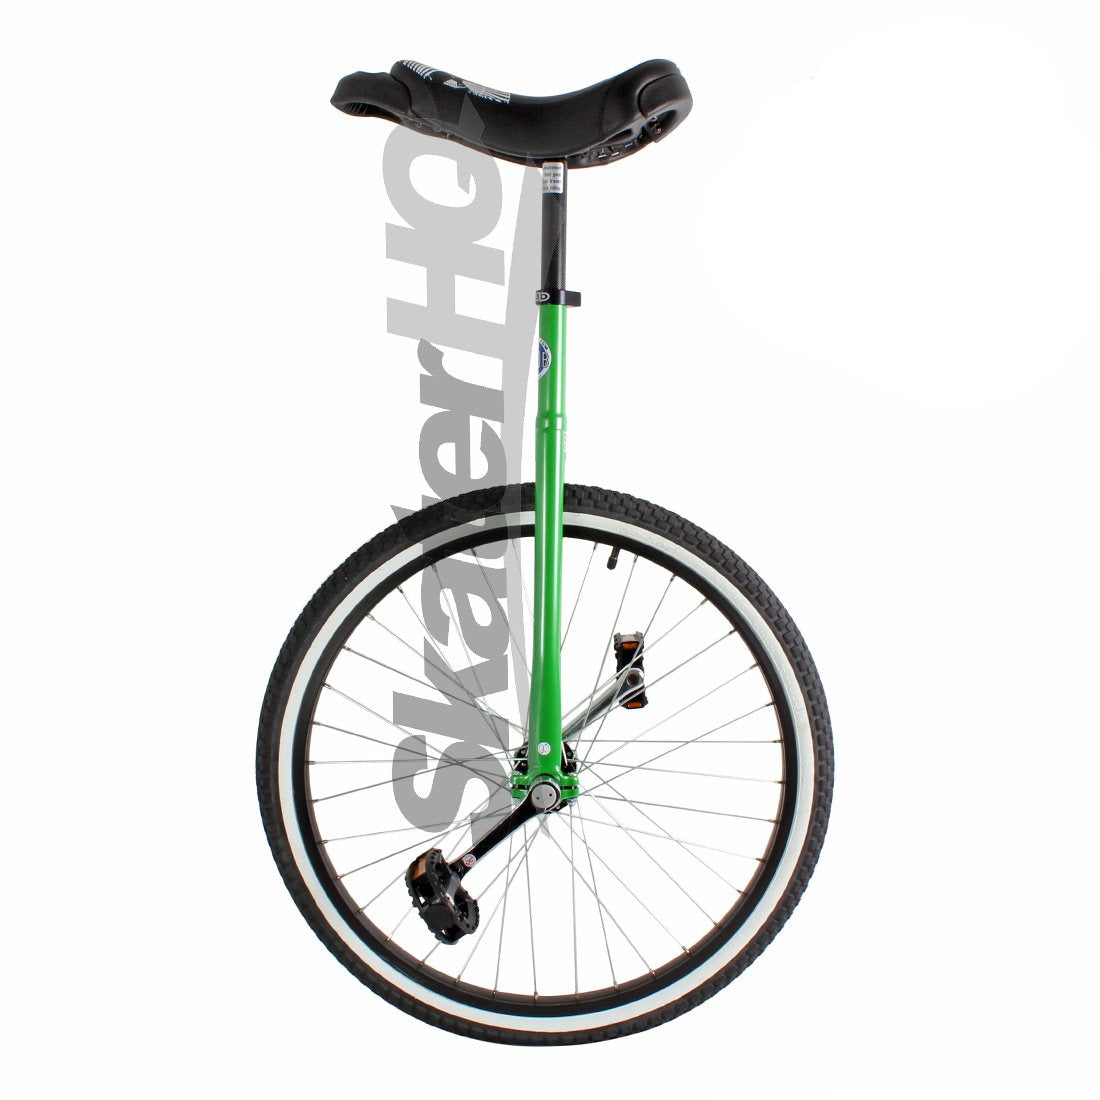 Club Freestyle 24inch Unicycle - Green Other Fun Toys